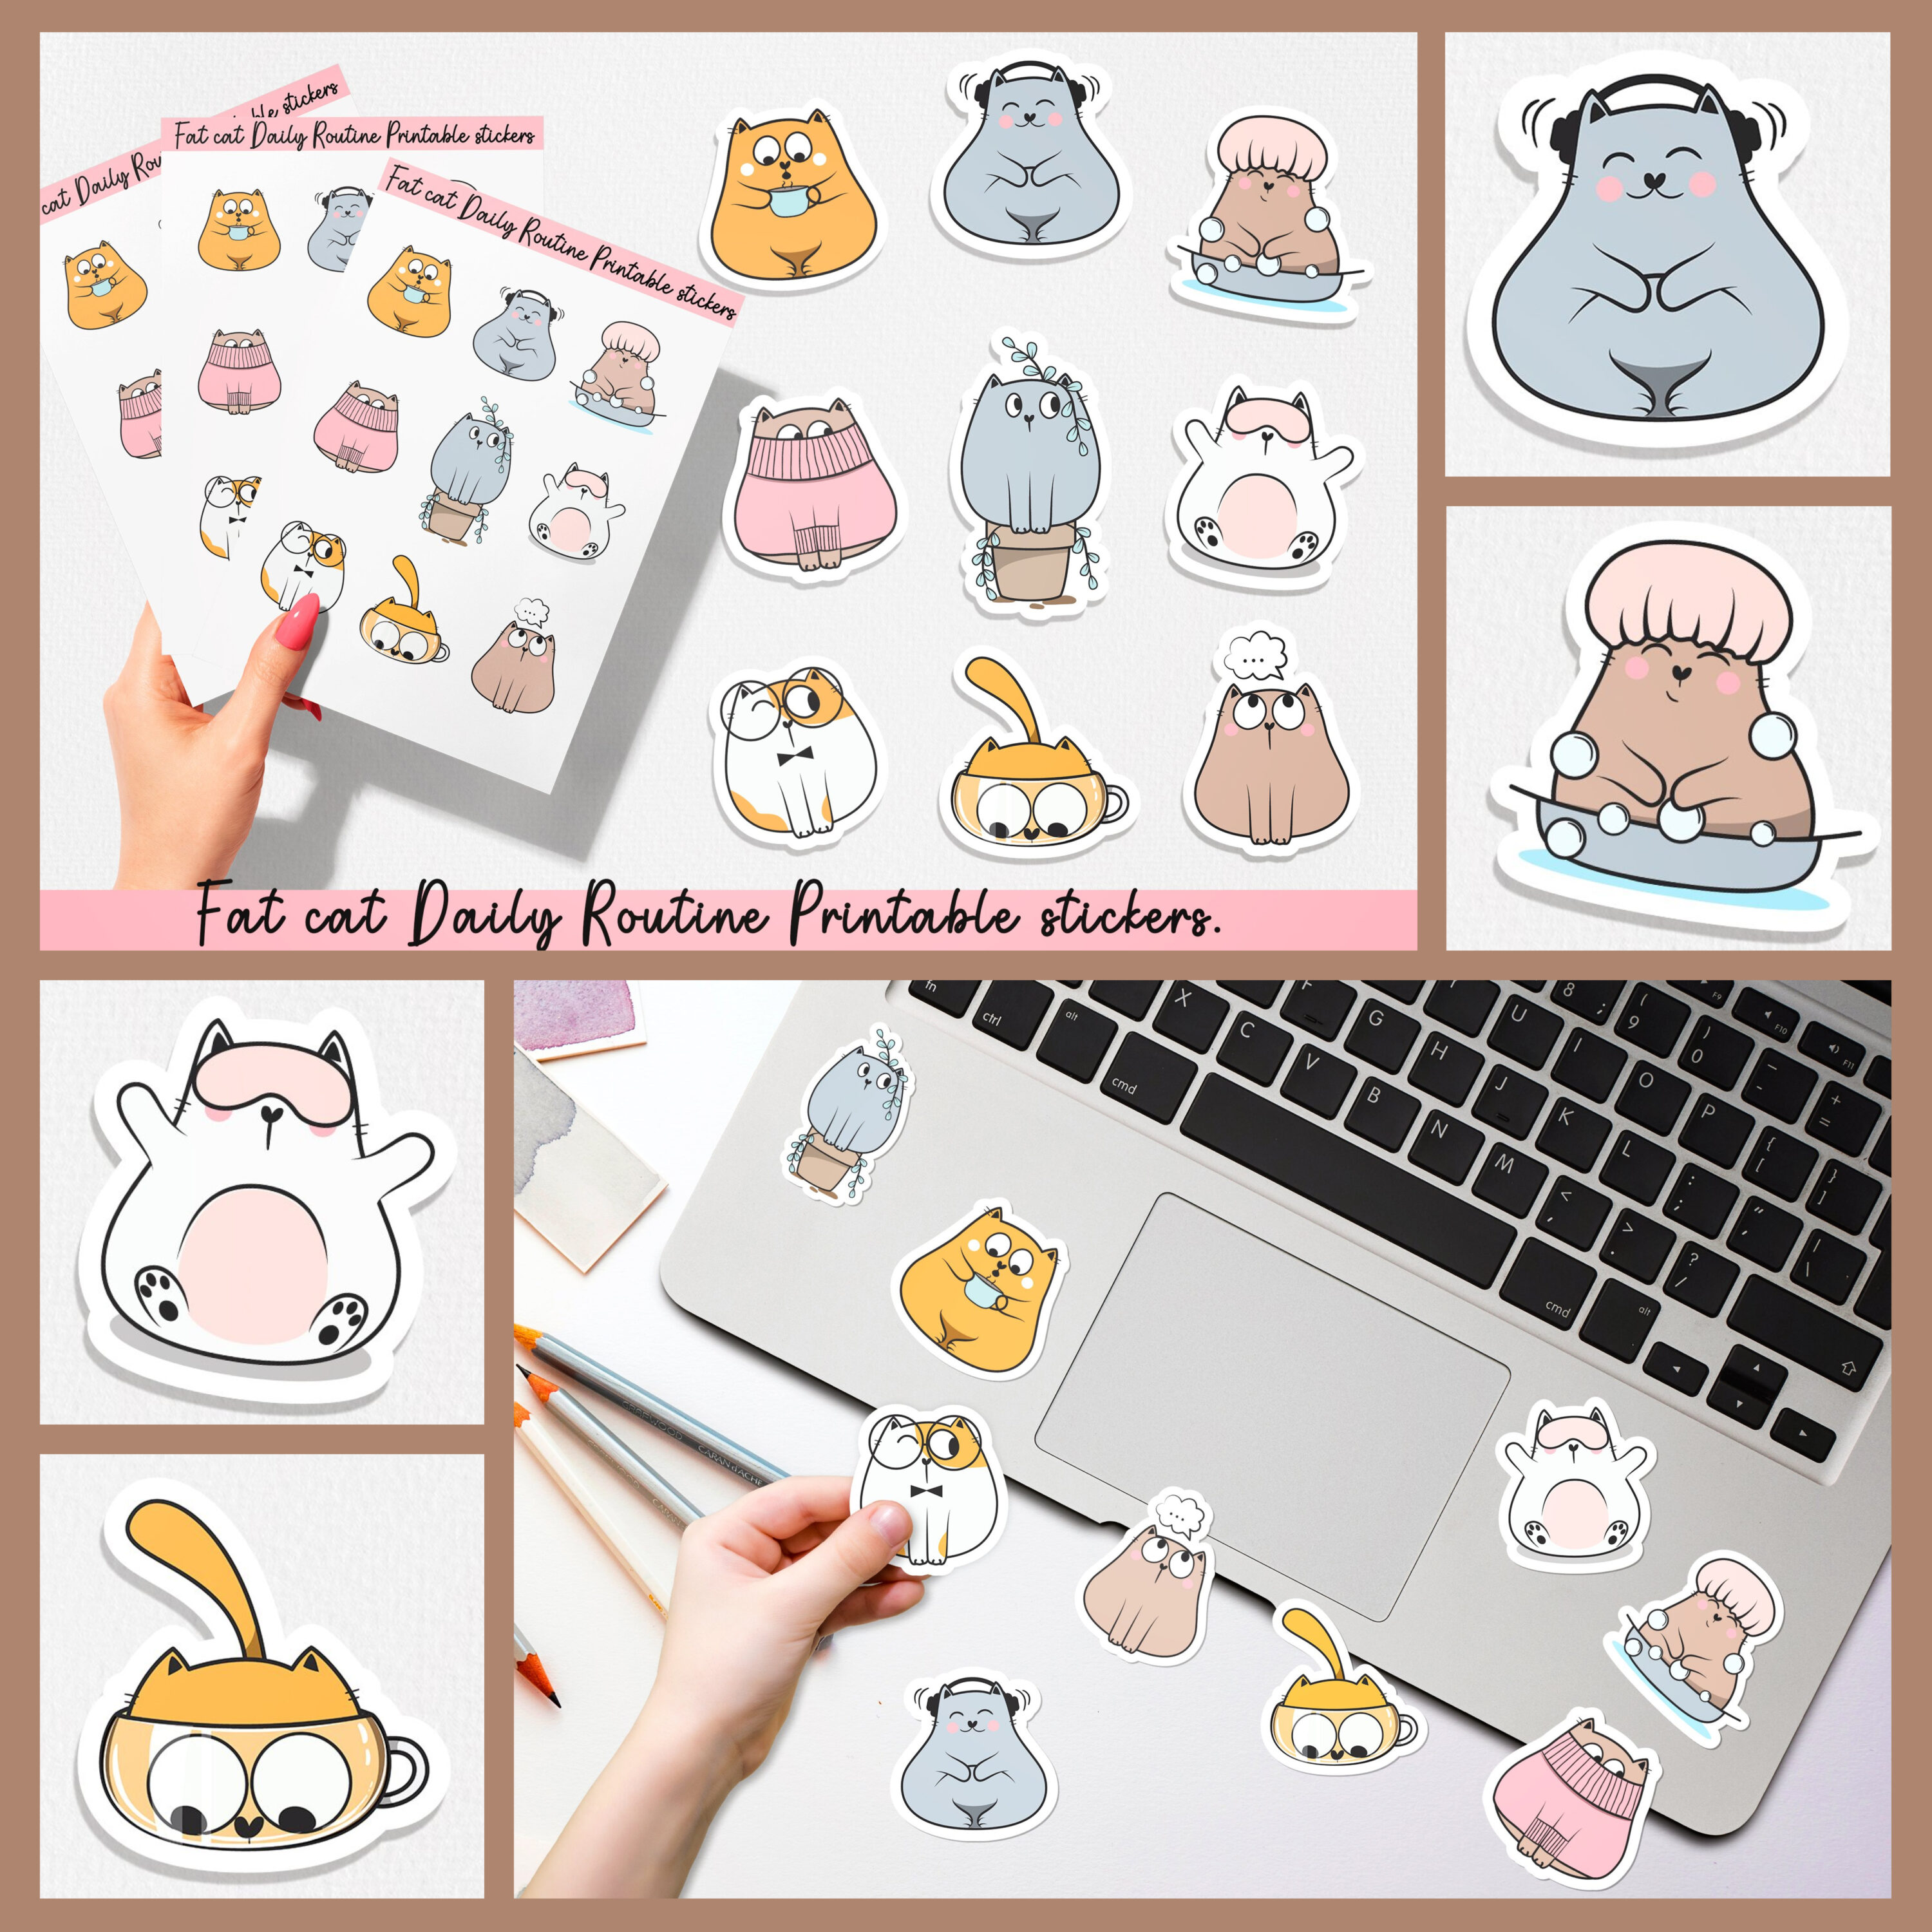 Prints of fat cat daily routine printable stickers.